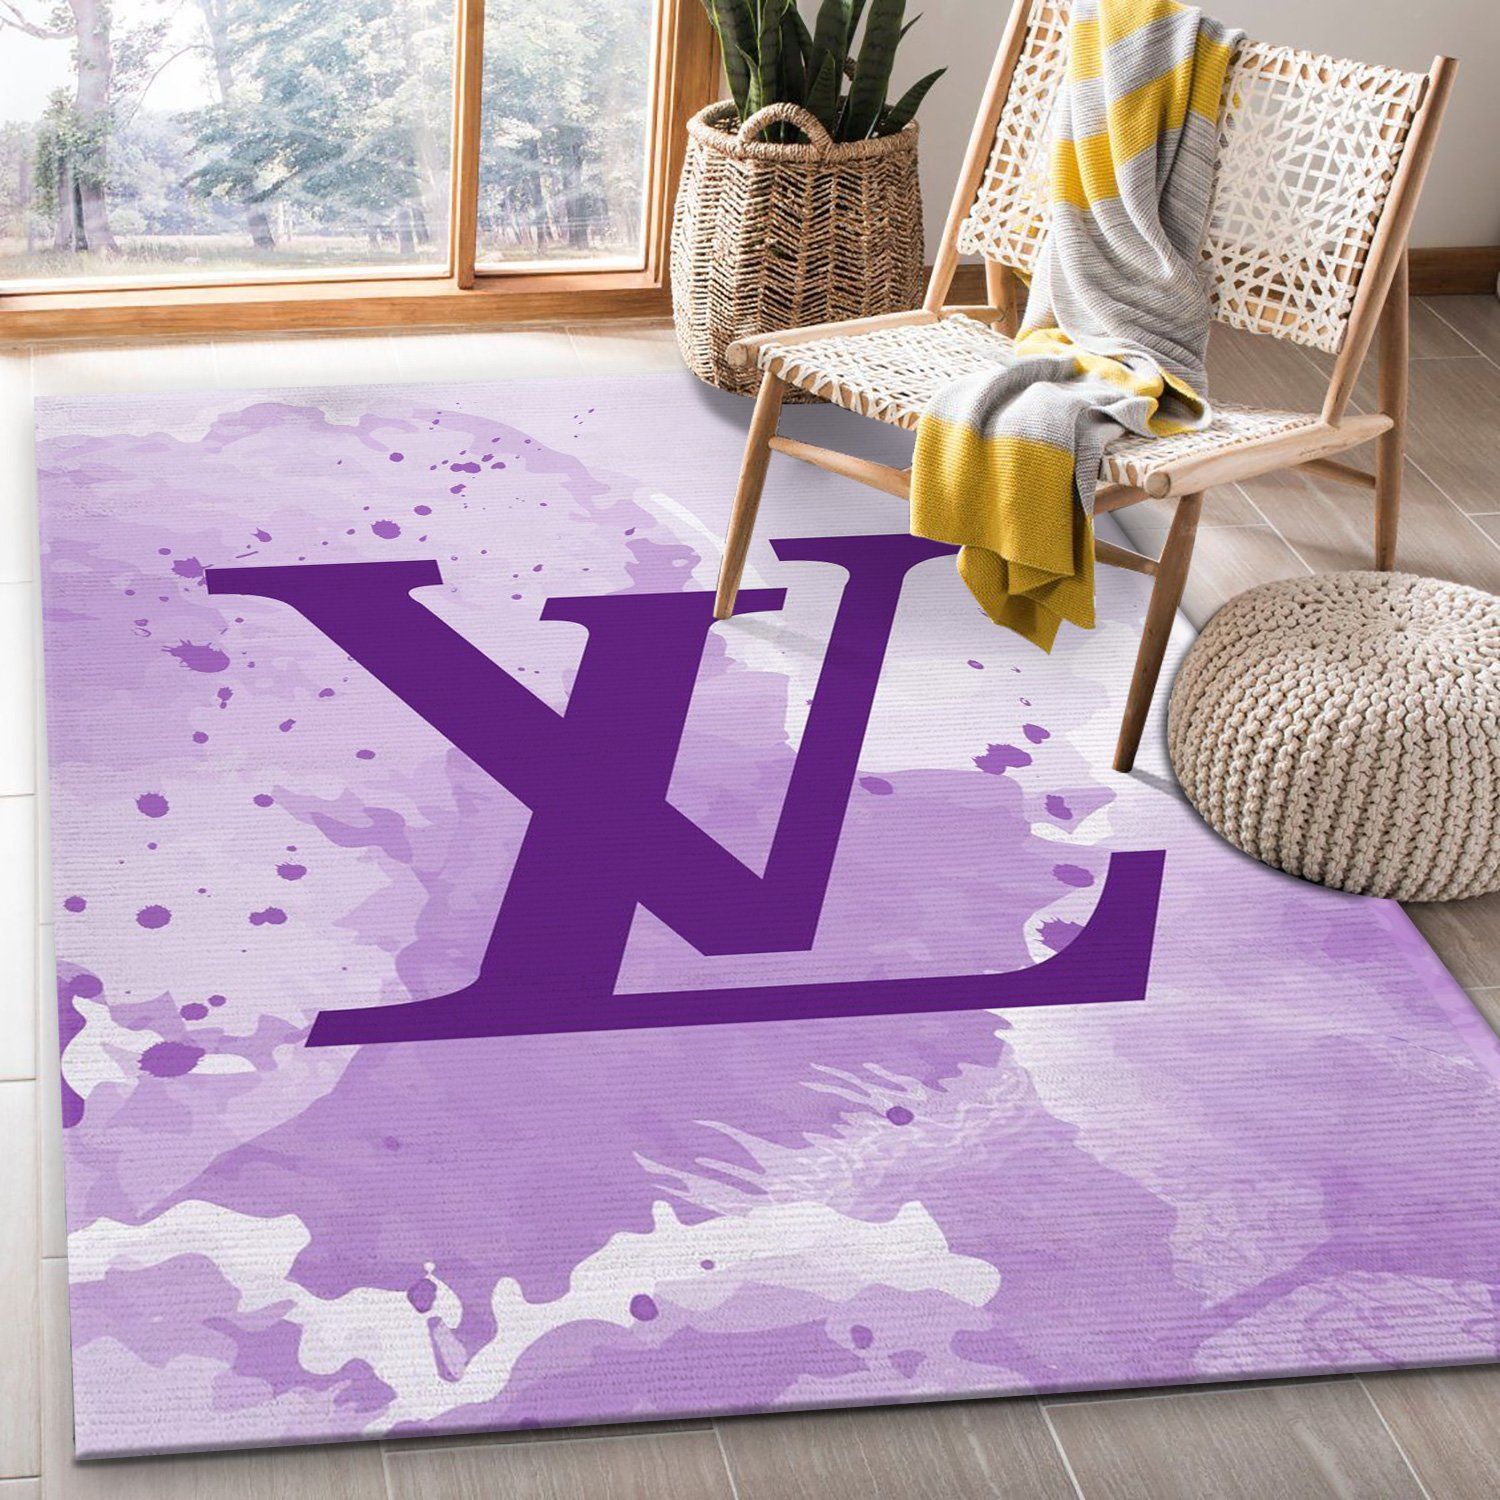 Louis Vuitton Rugs Hot 2023 Living Room Rugs Decor 12308–091727